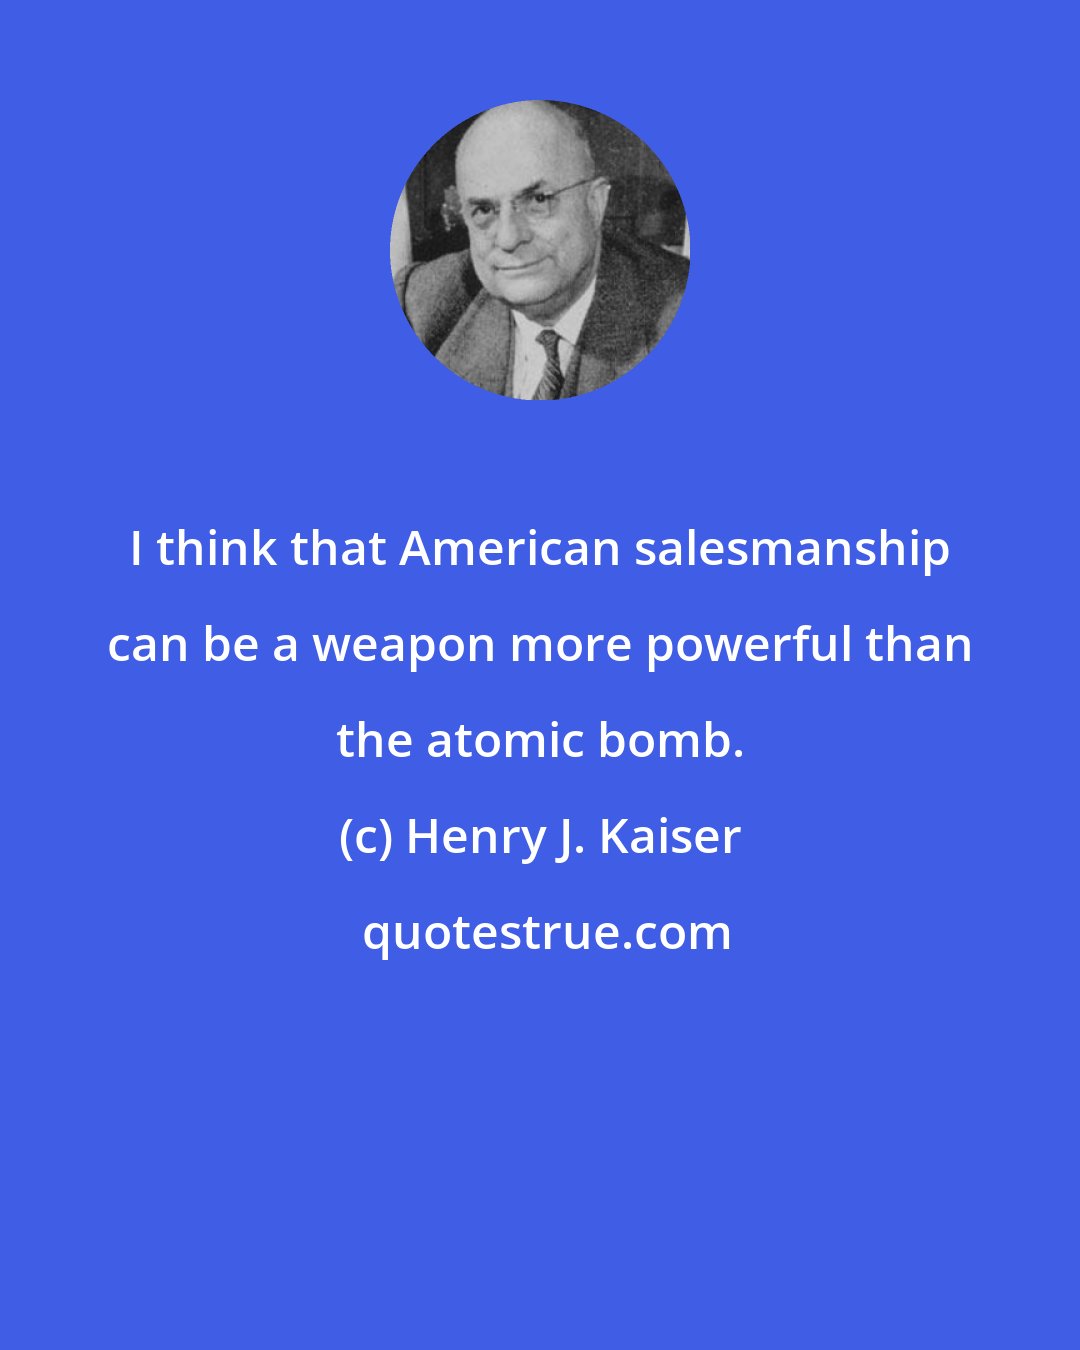 Henry J. Kaiser: I think that American salesmanship can be a weapon more powerful than the atomic bomb.